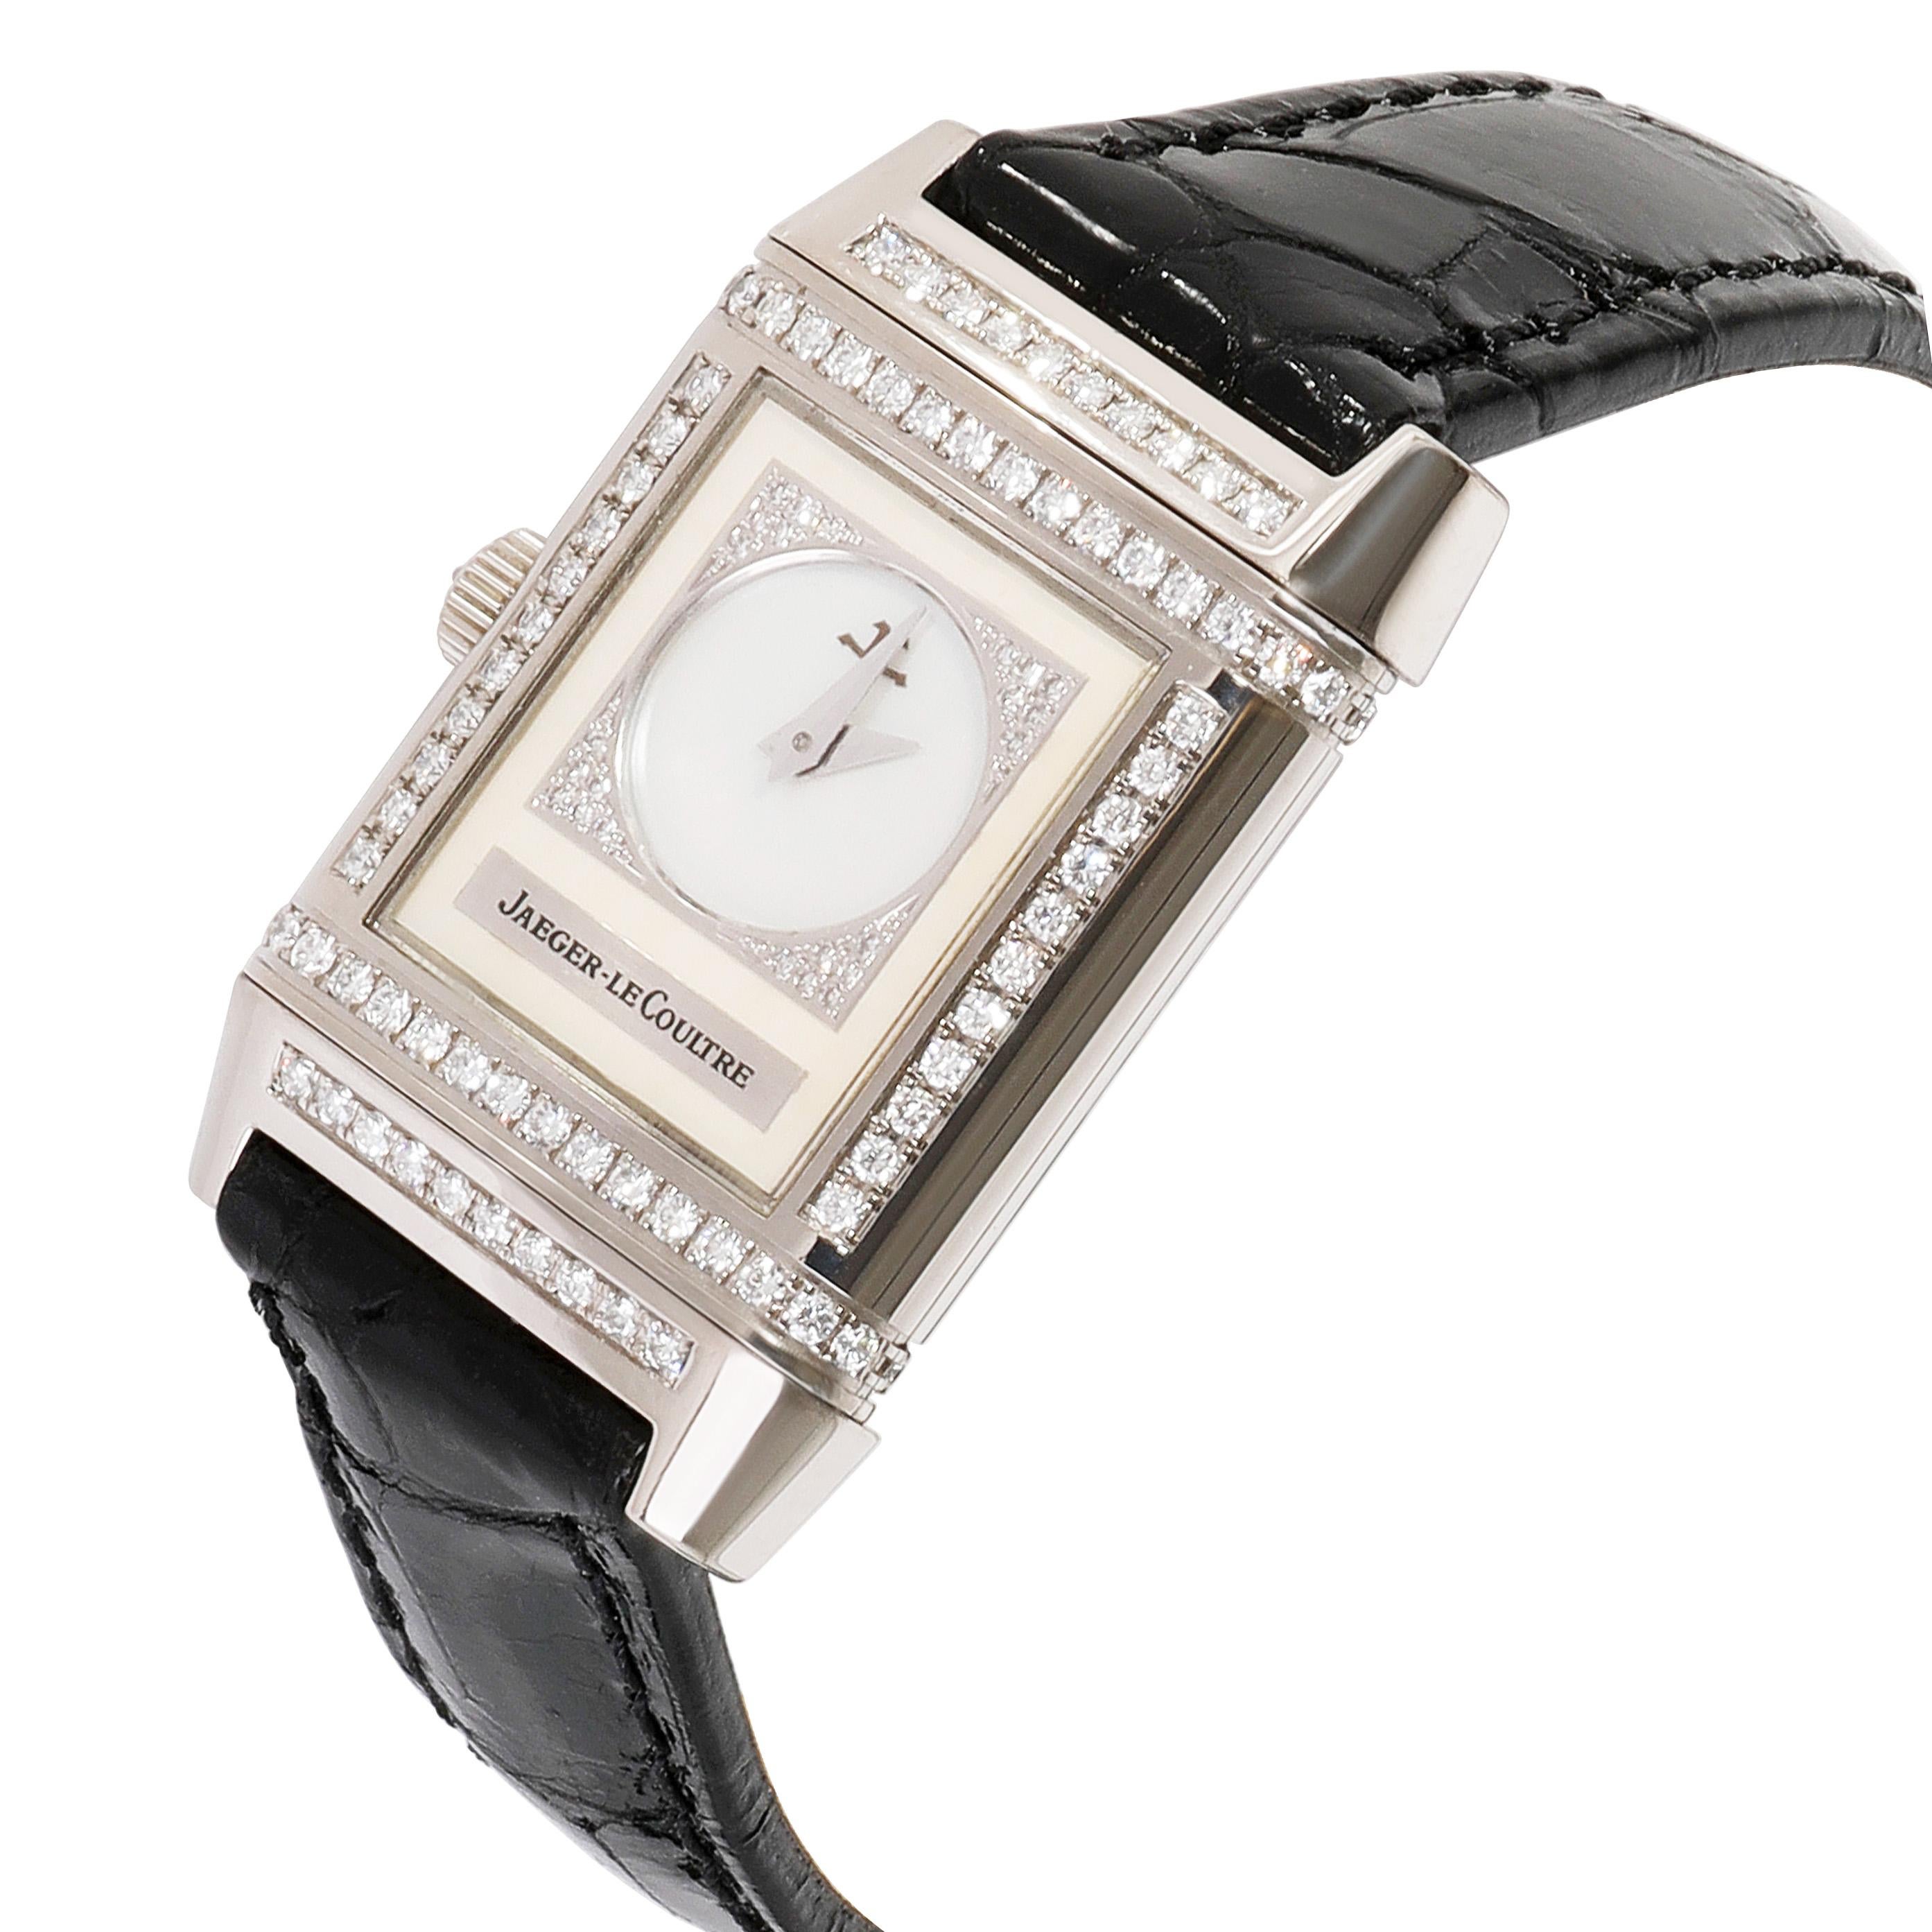 Jaeger-LeCoultre Duetto Reverso 266.3.44 Women's Watch in 18kt White Gold 1